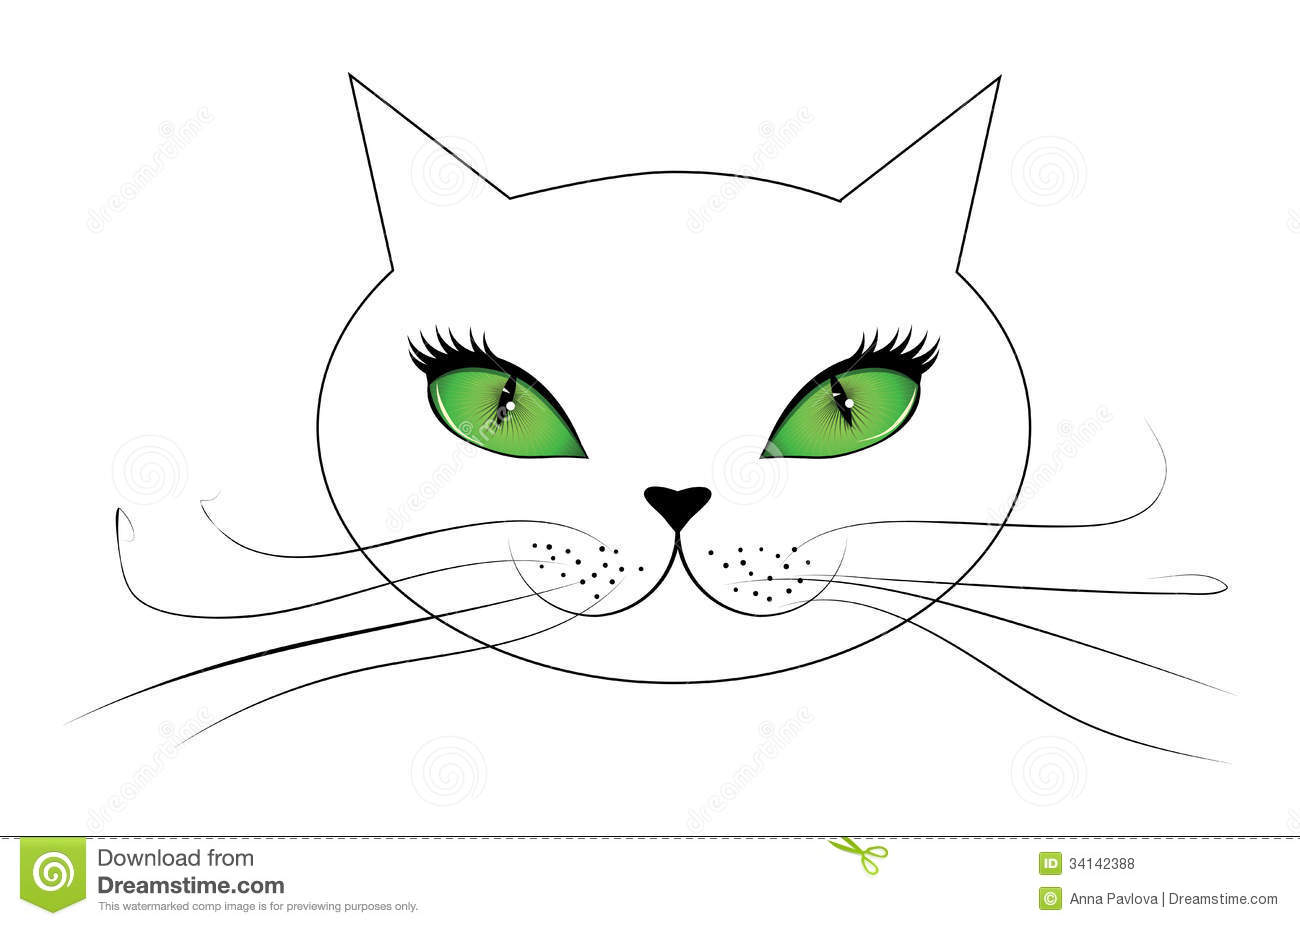 For Cat Whiskers Clipart Displaying 19 Images For Cat Whiskers Clipart